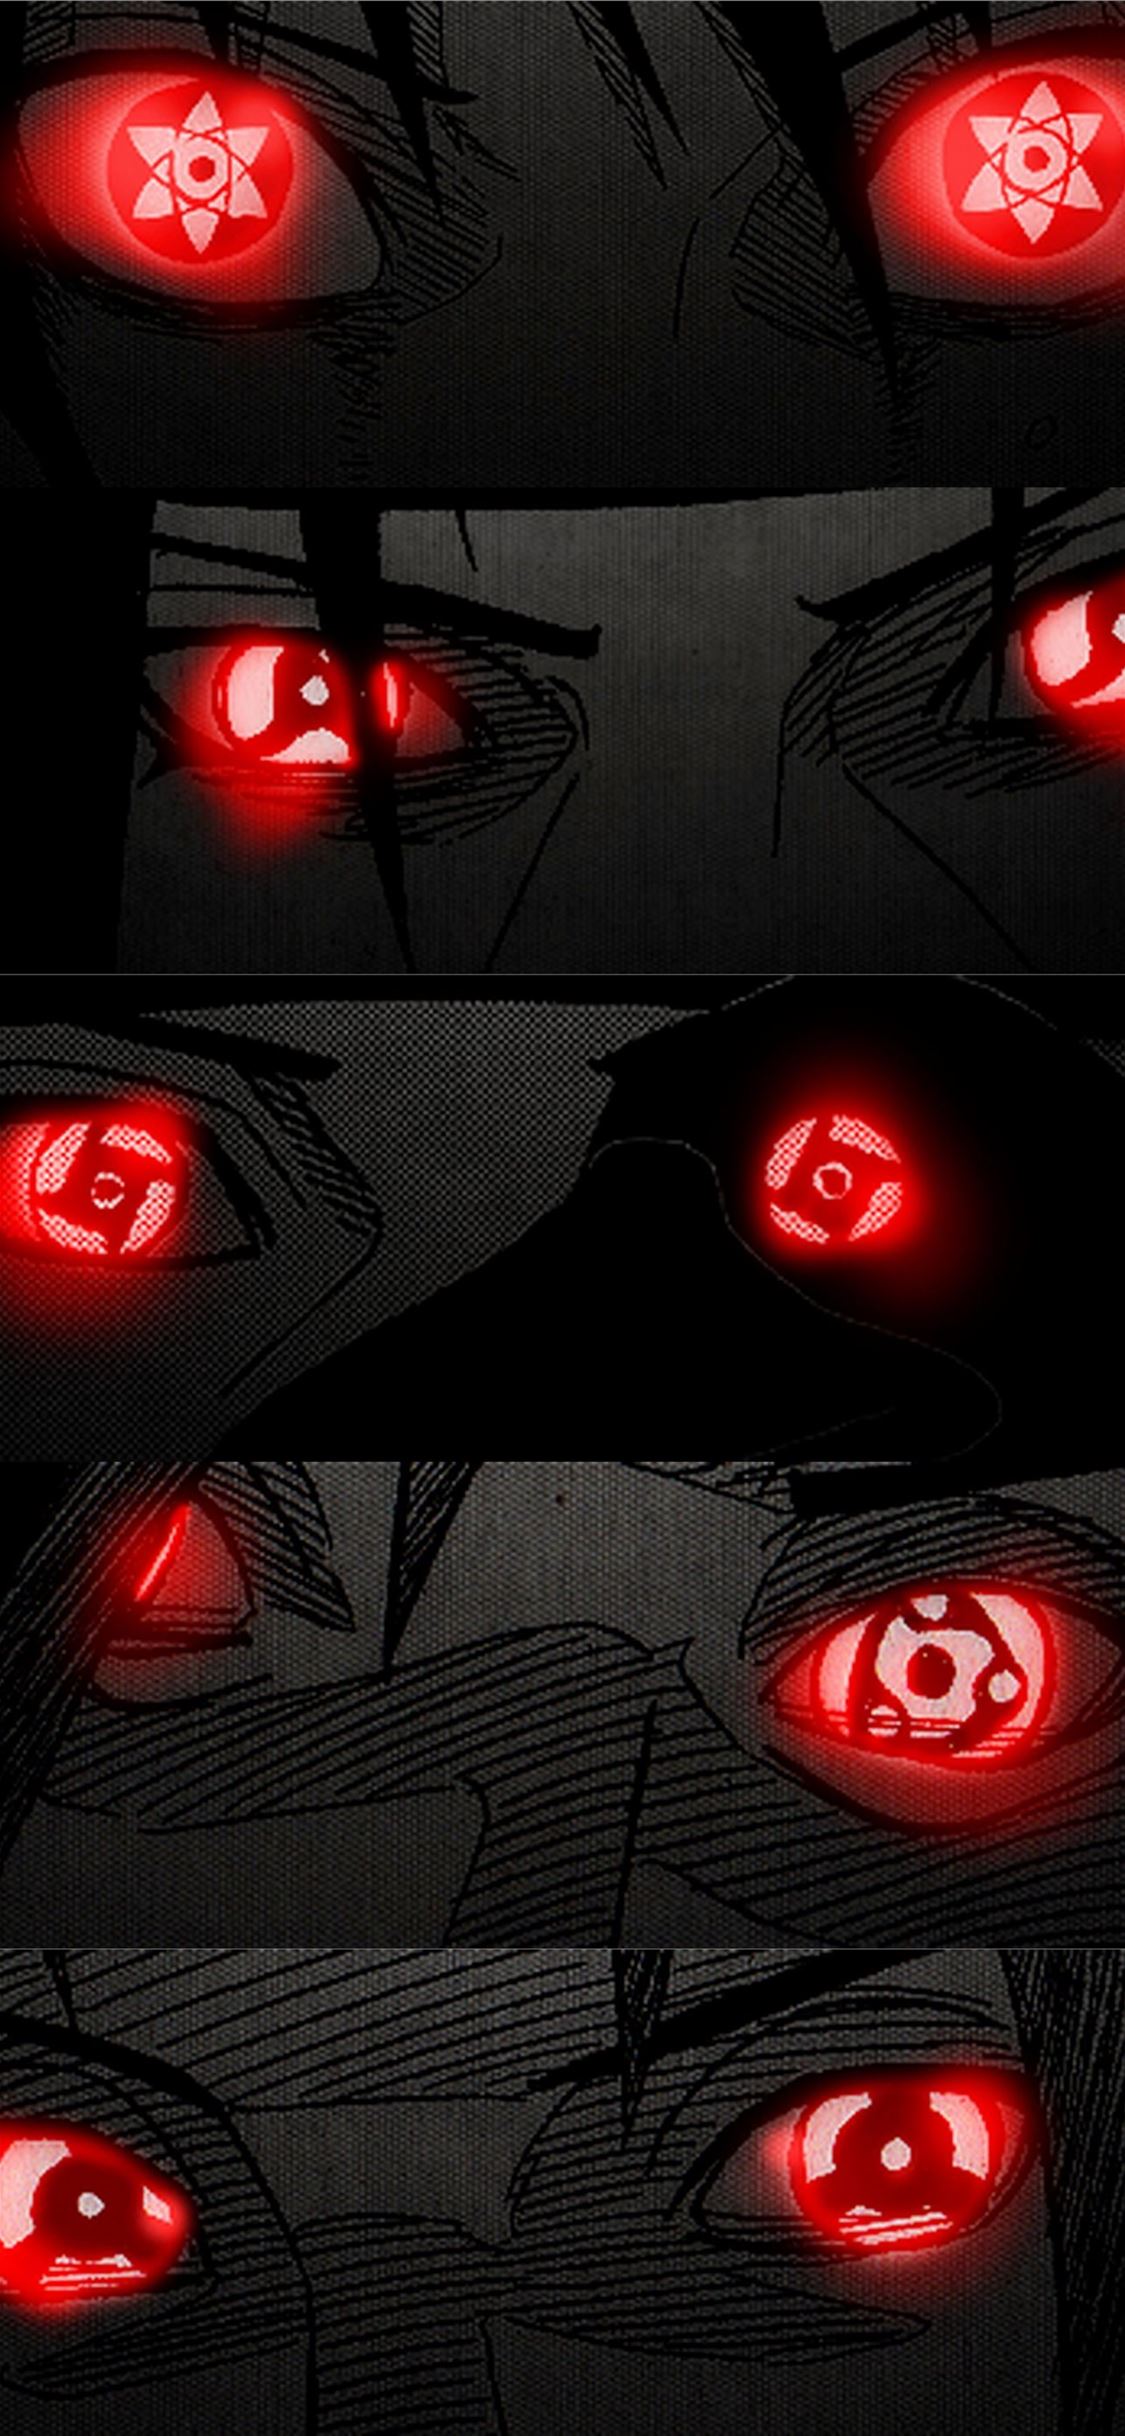 9 Mangekyou Sharingan 4k Wallpaper For iPhone Android and Desktop  Page  2 of 8  The RamenSwag